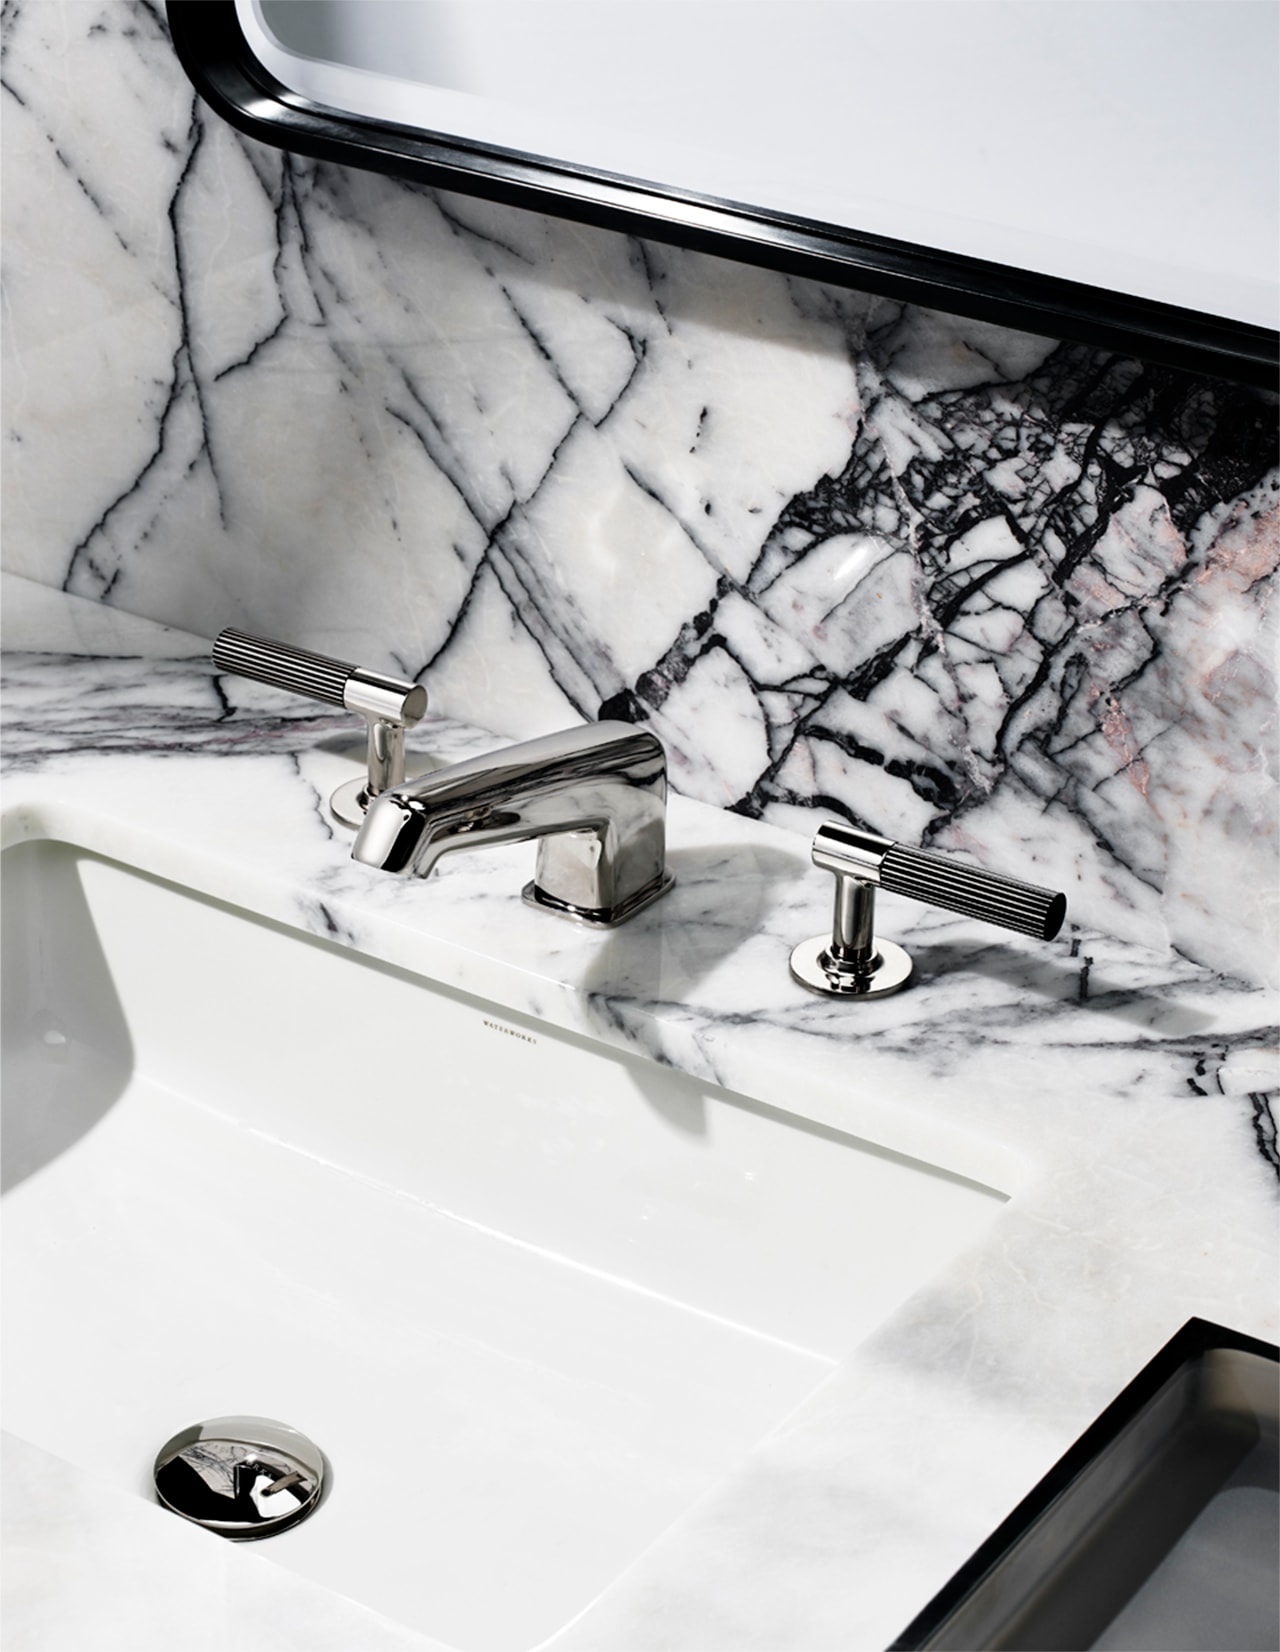 Created in partnership with Gachot Studios, Bond represents a level of soul and artistry that's rarely found in modern bath design.